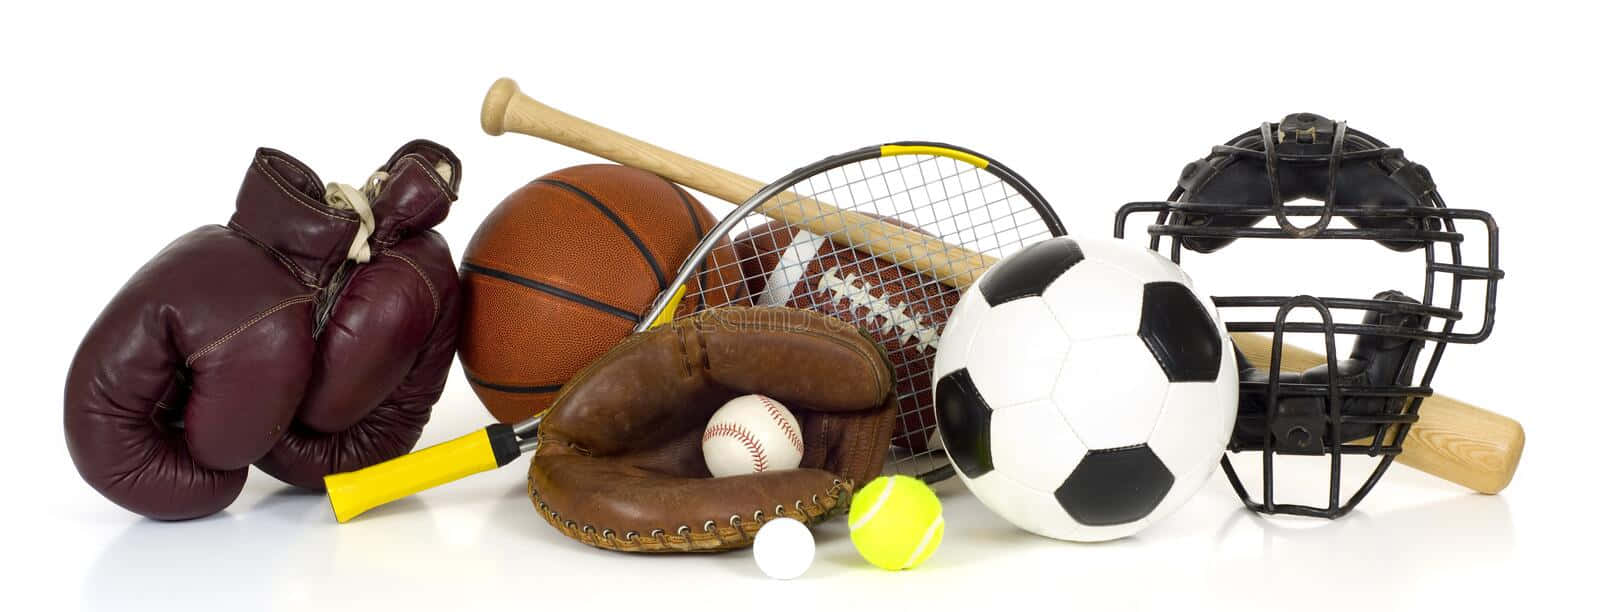 sports safety equipment